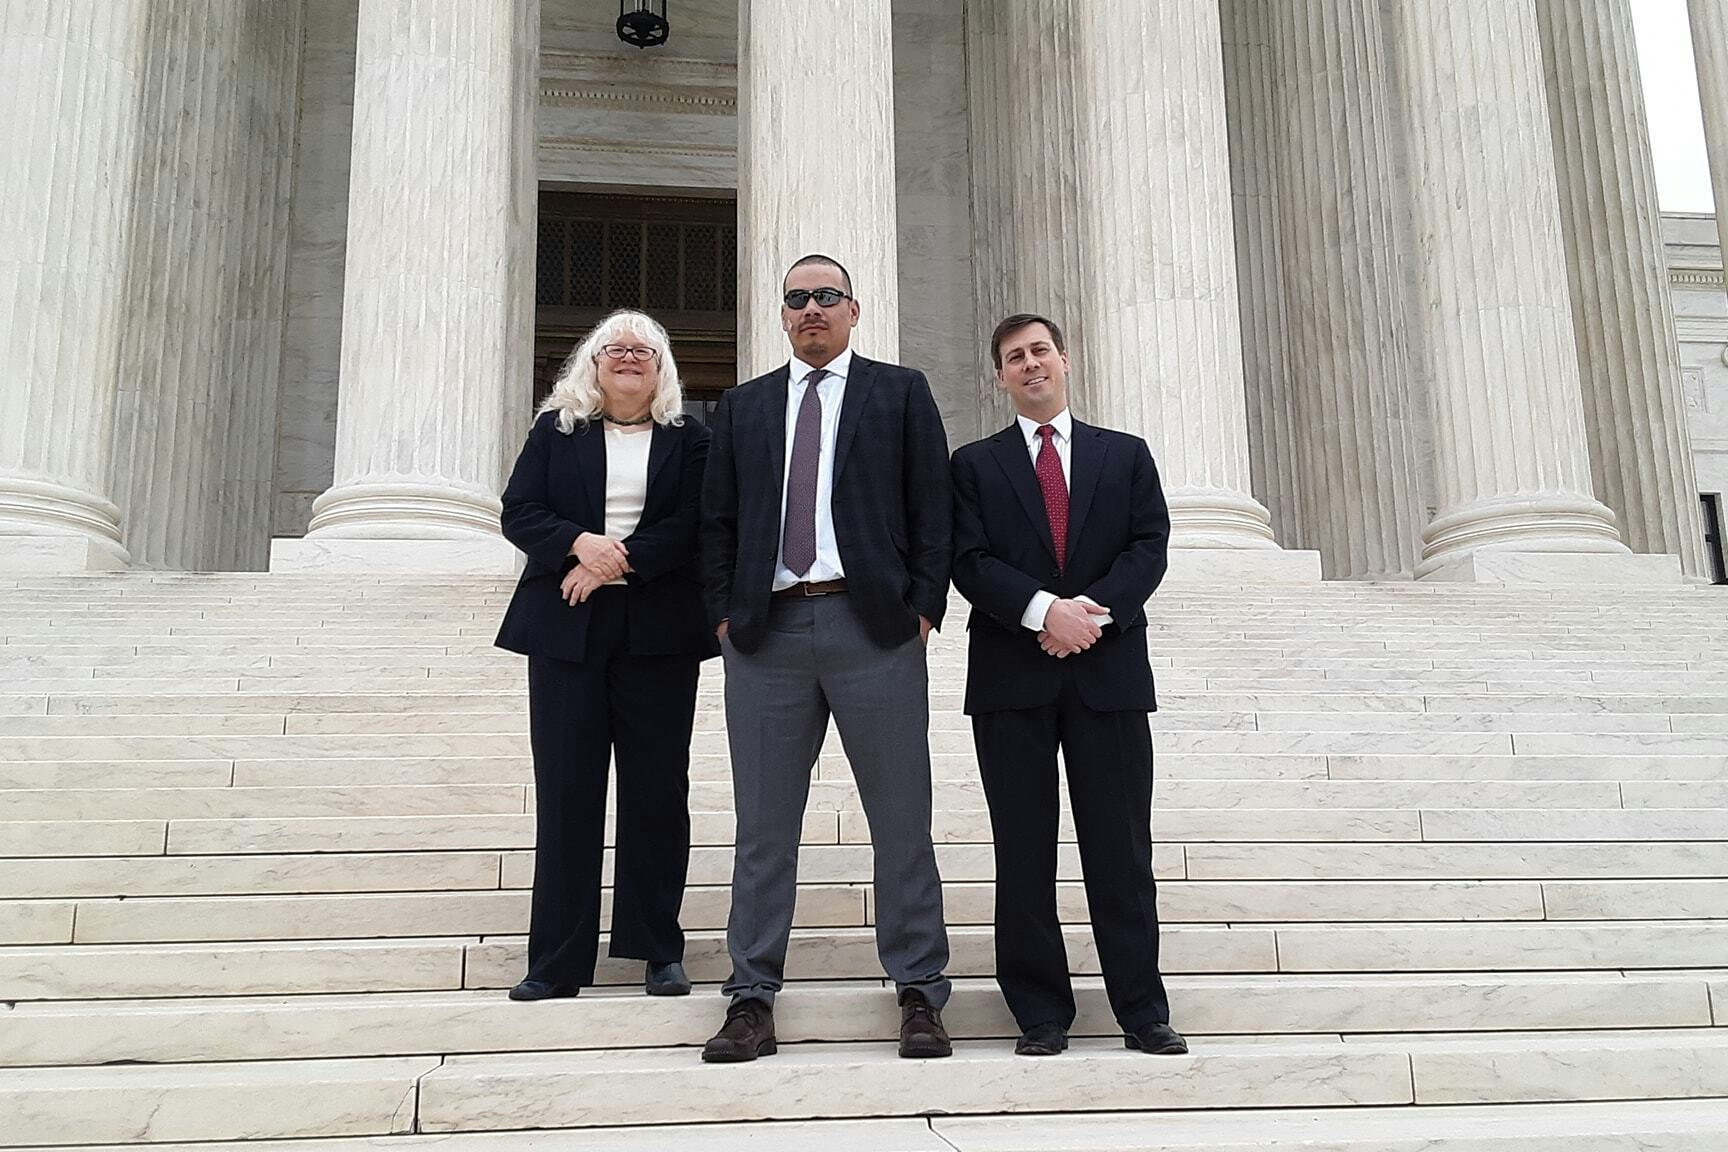 Clayvin Herrera, center, took his Indian hunting dispute with Sheridan County, Wyoming, to the U.S. Supreme Court. He's on the court step with his legal team in this file photo.